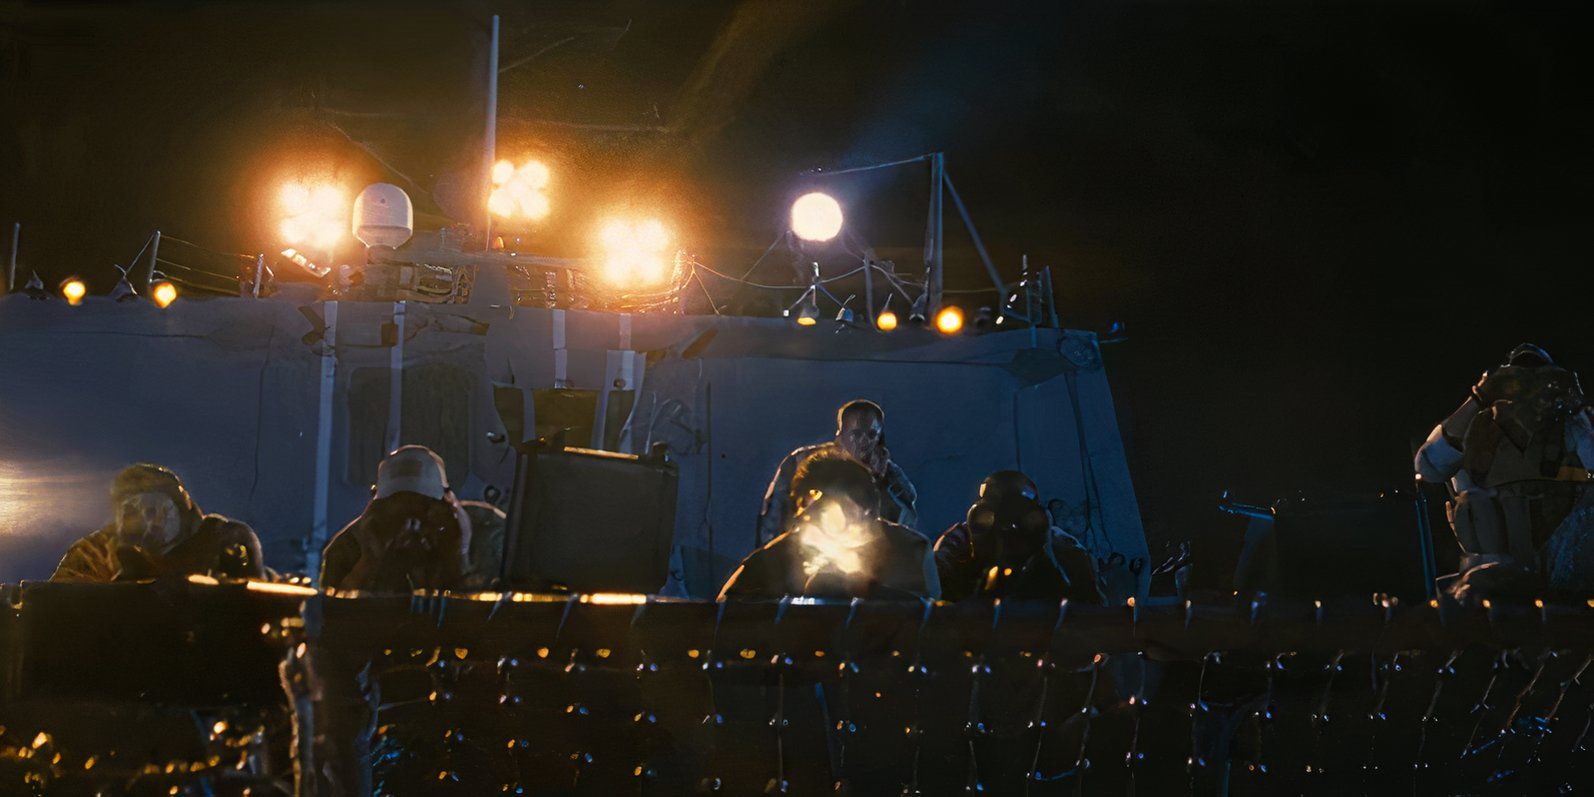 SEAL Team Six fires sniper shots at the Somali pirates in Captain Phillips